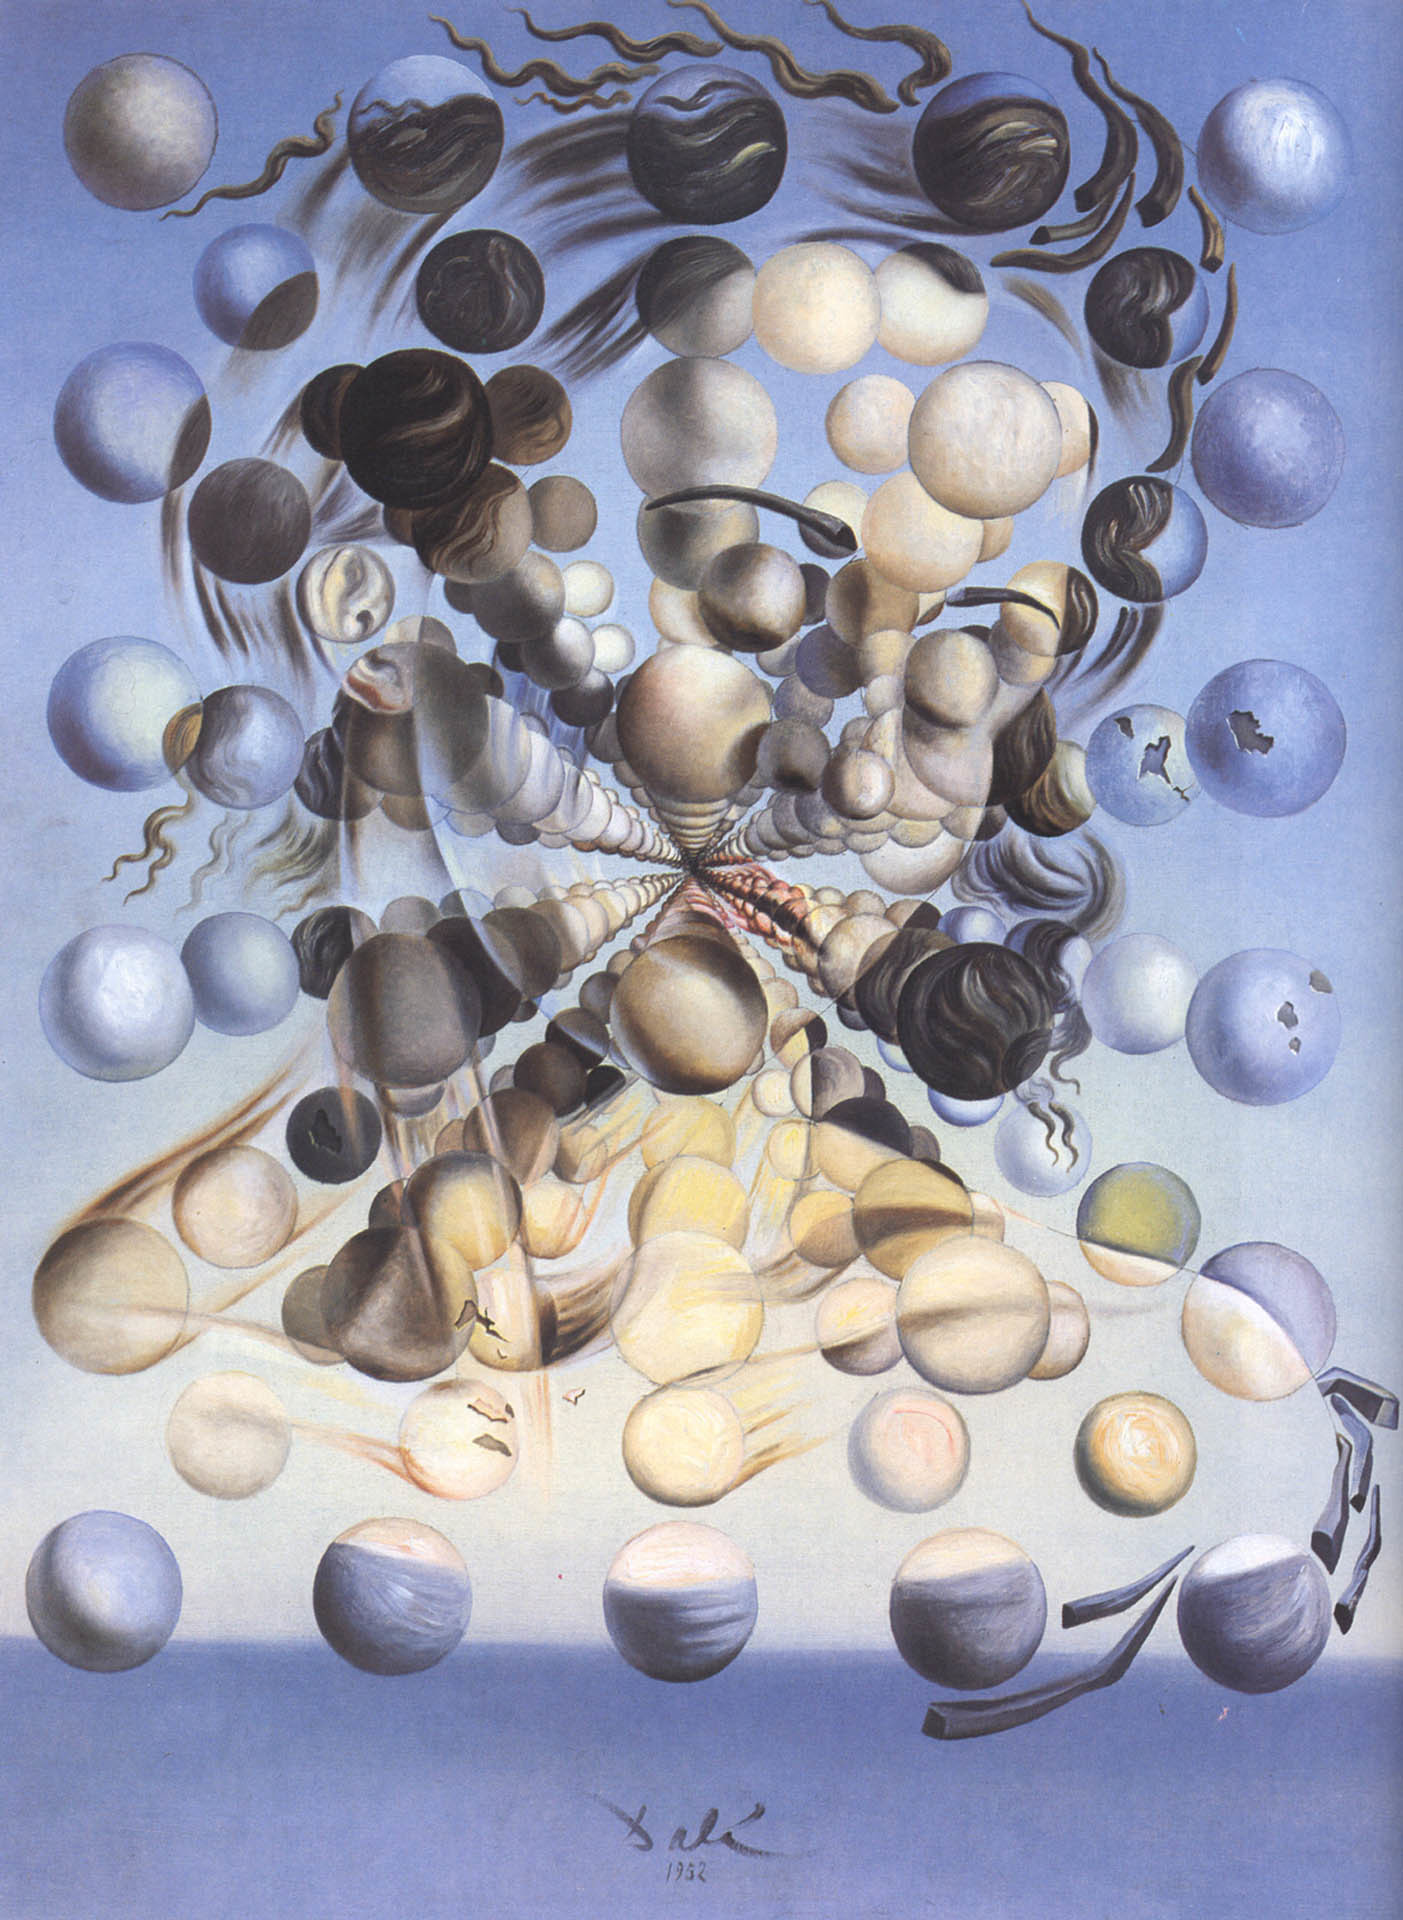 1403x1920 Salvador Dali, Galatea of the spheres, 1952, oil on canvas,